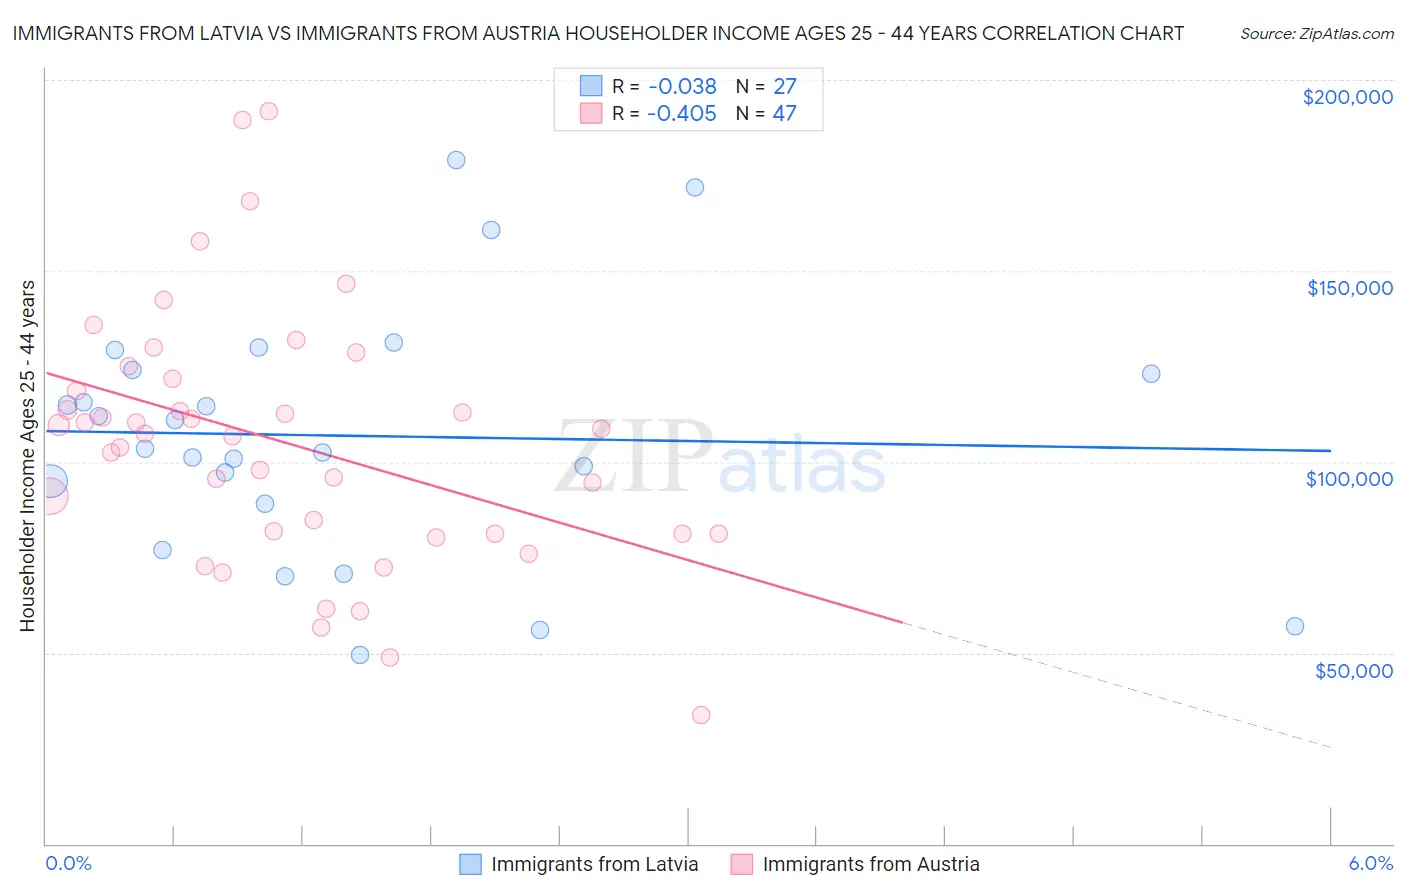 Immigrants from Latvia vs Immigrants from Austria Householder Income Ages 25 - 44 years